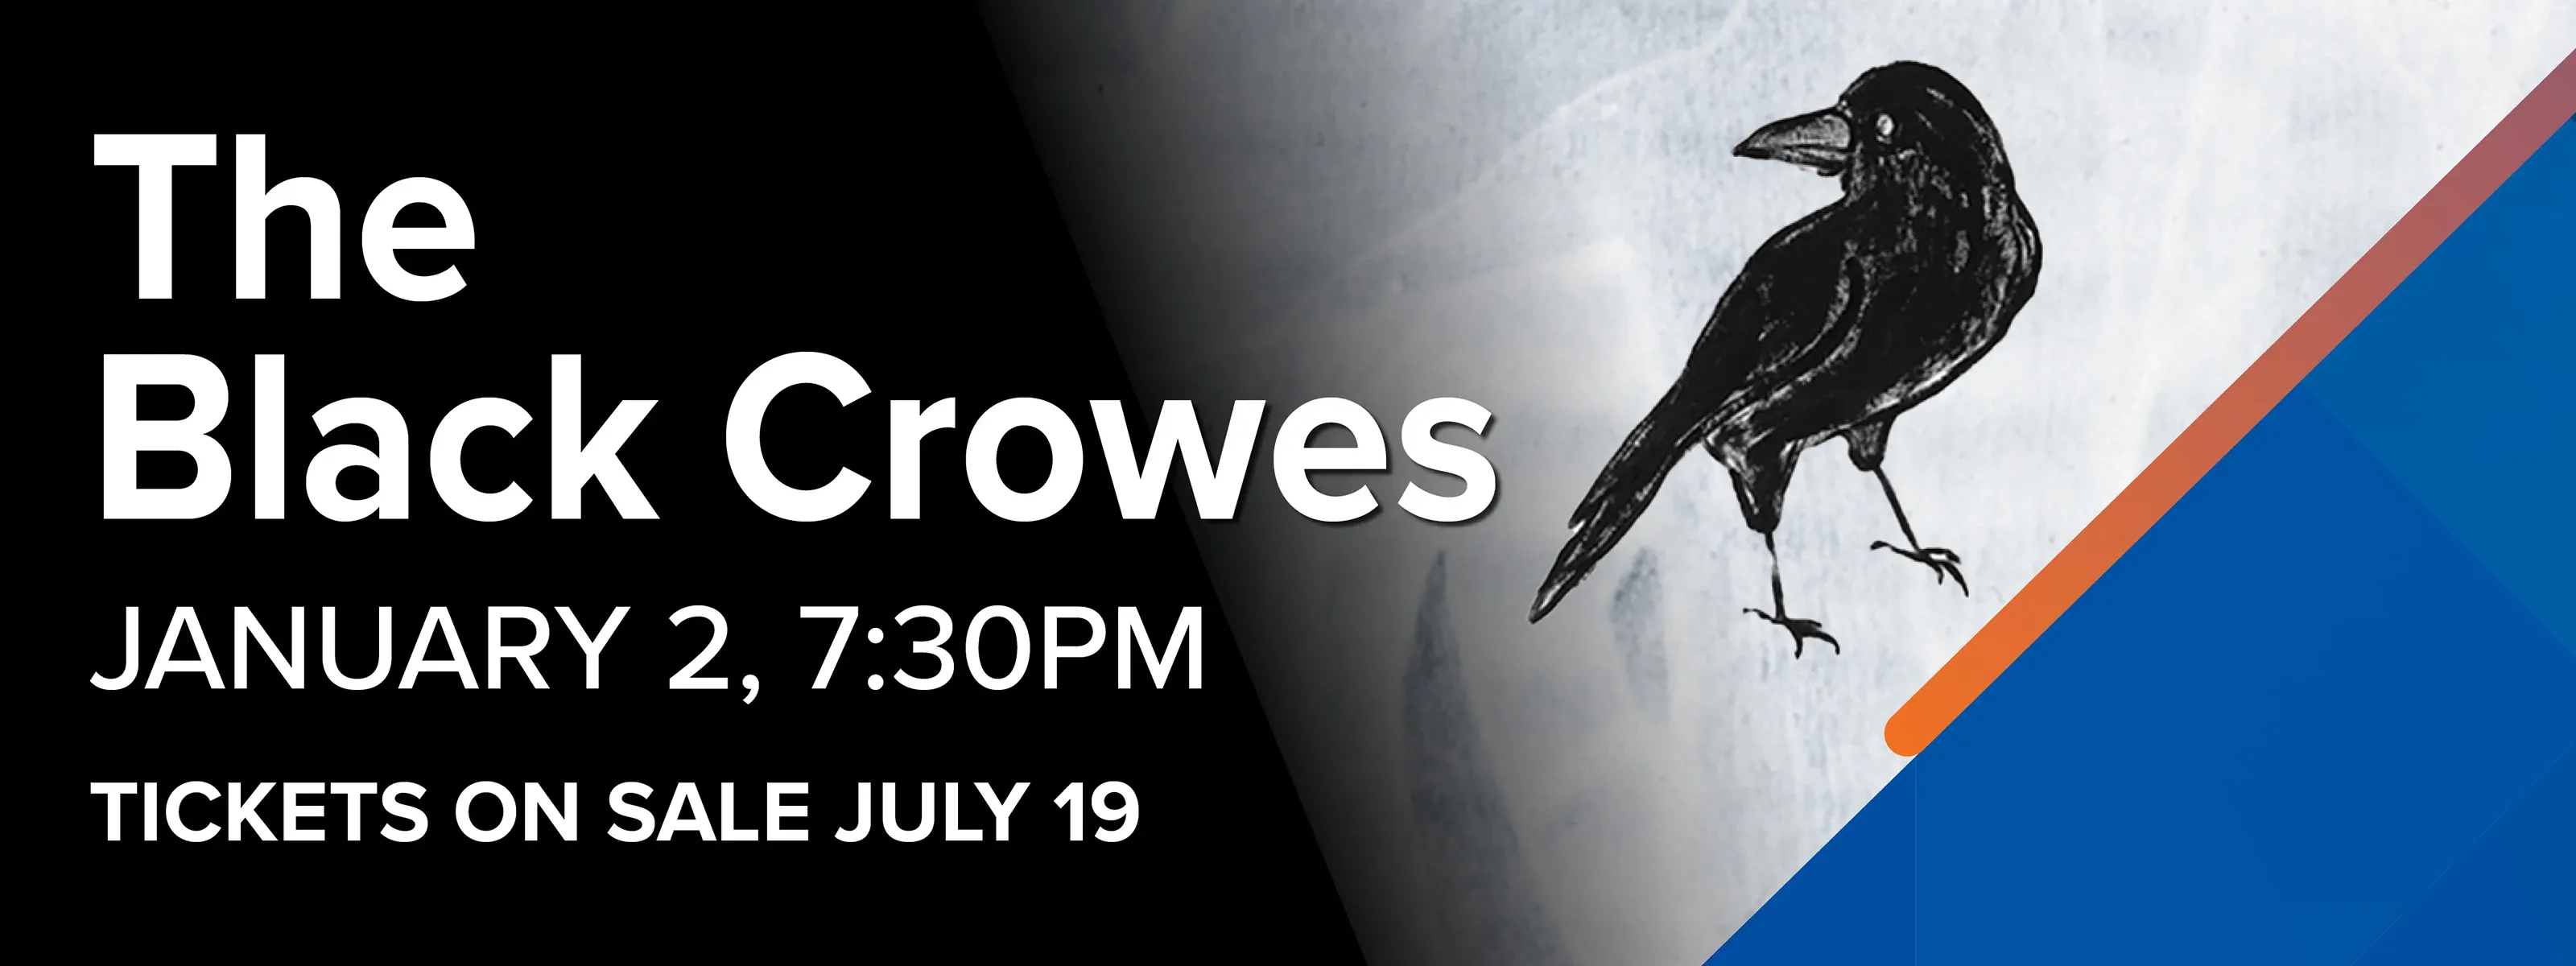 The Black Crowes - January 2, 7:30pm Tickets On Sale July 19 @ 10am